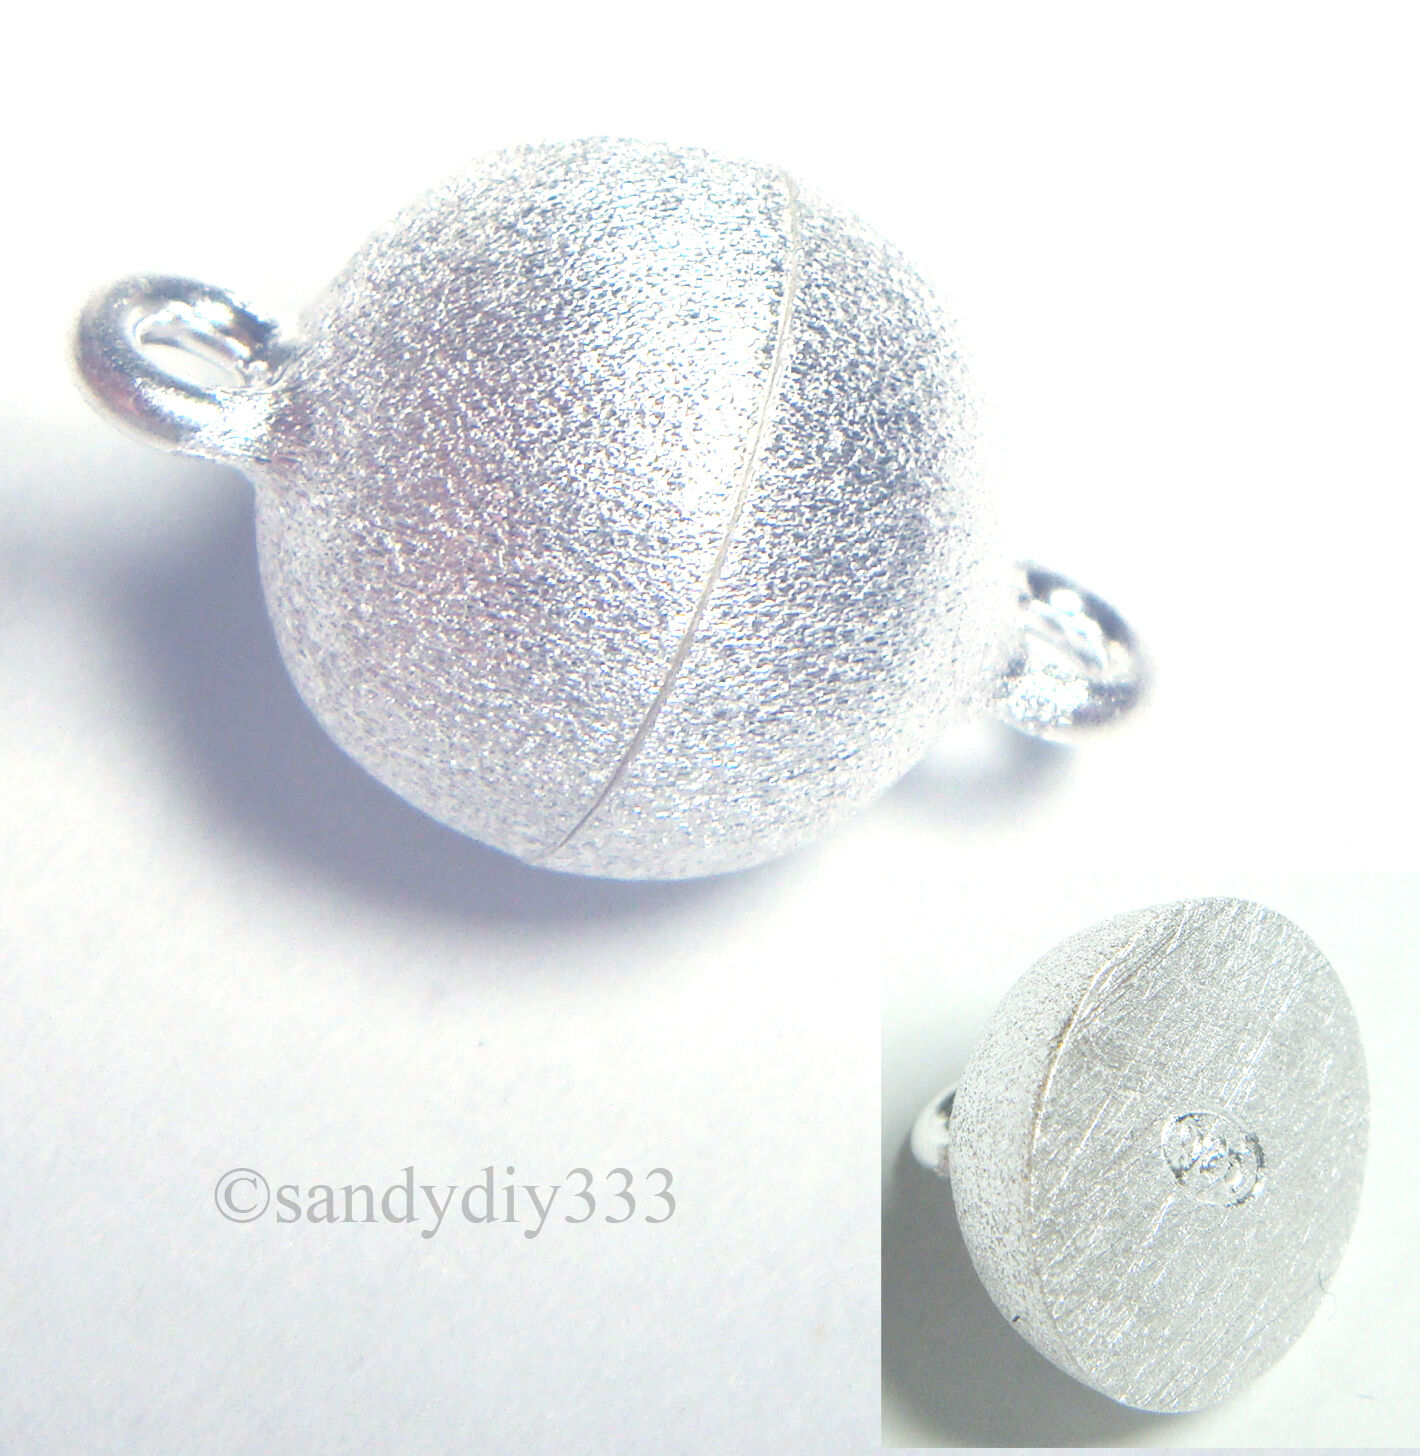 1x STERLING SILVER STARDUST ROUND BALL MAGNETIC CLASP 8mm N725